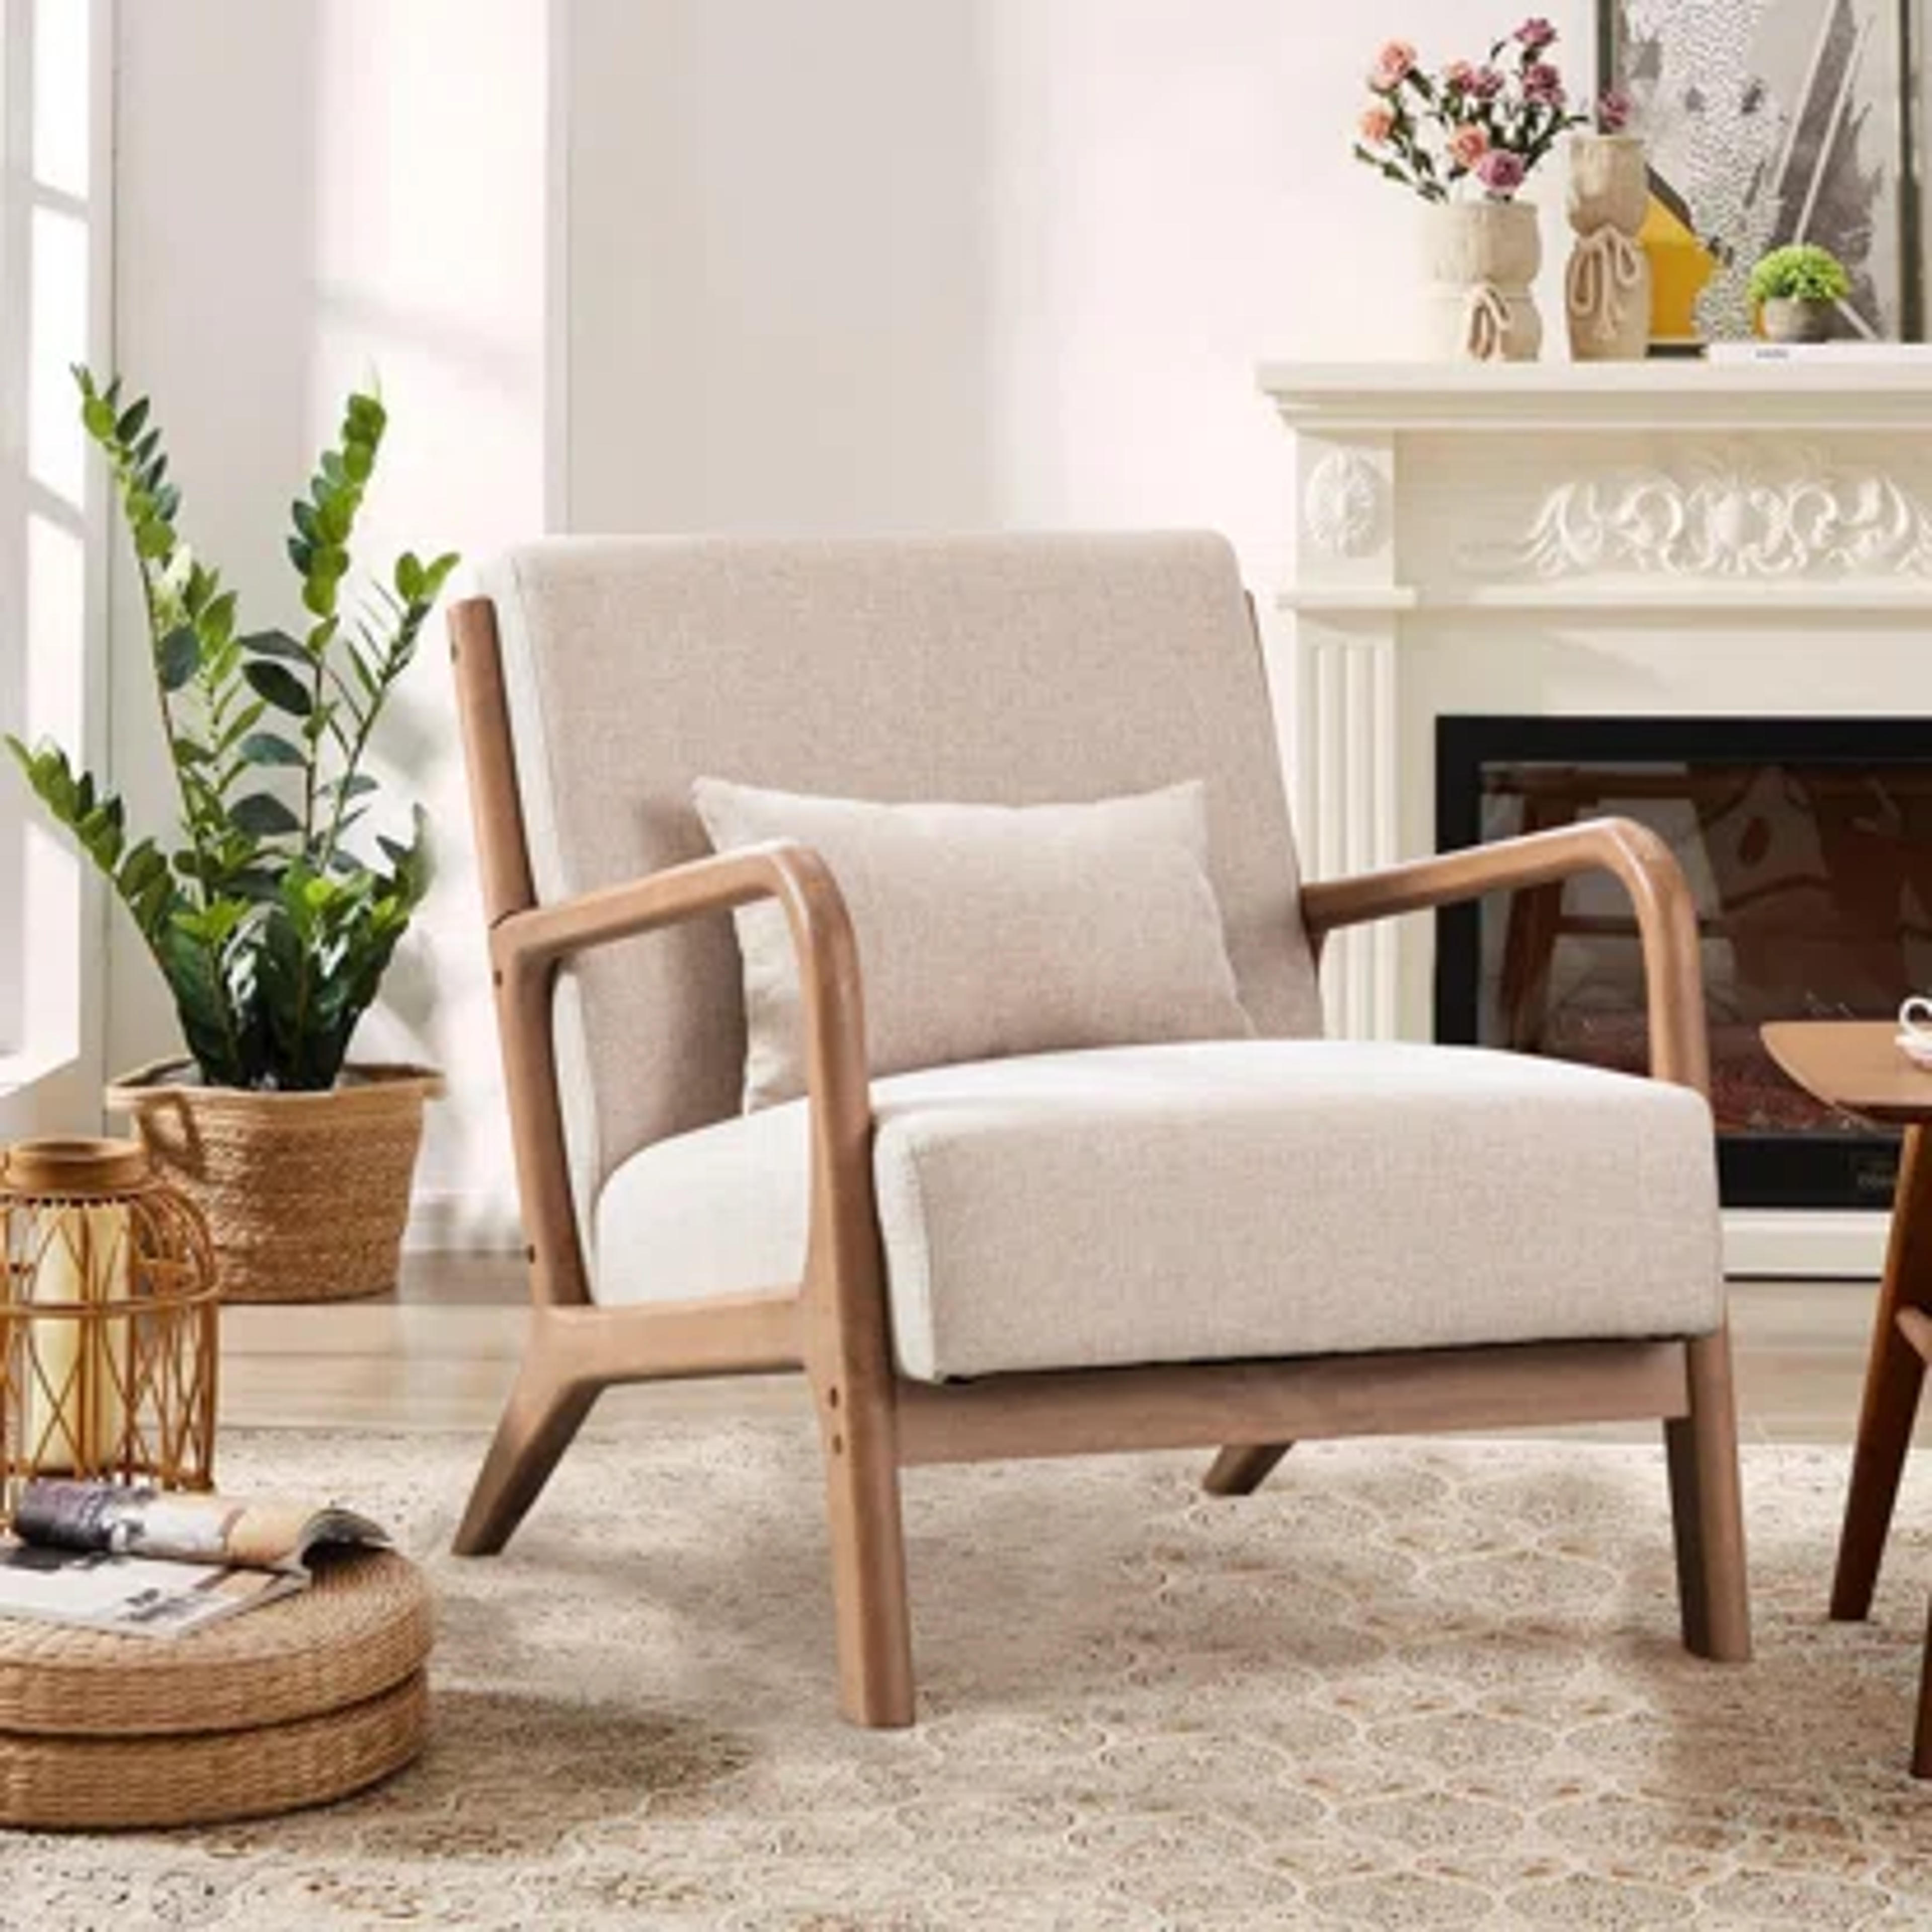 Living Room Seating - up to 60% off